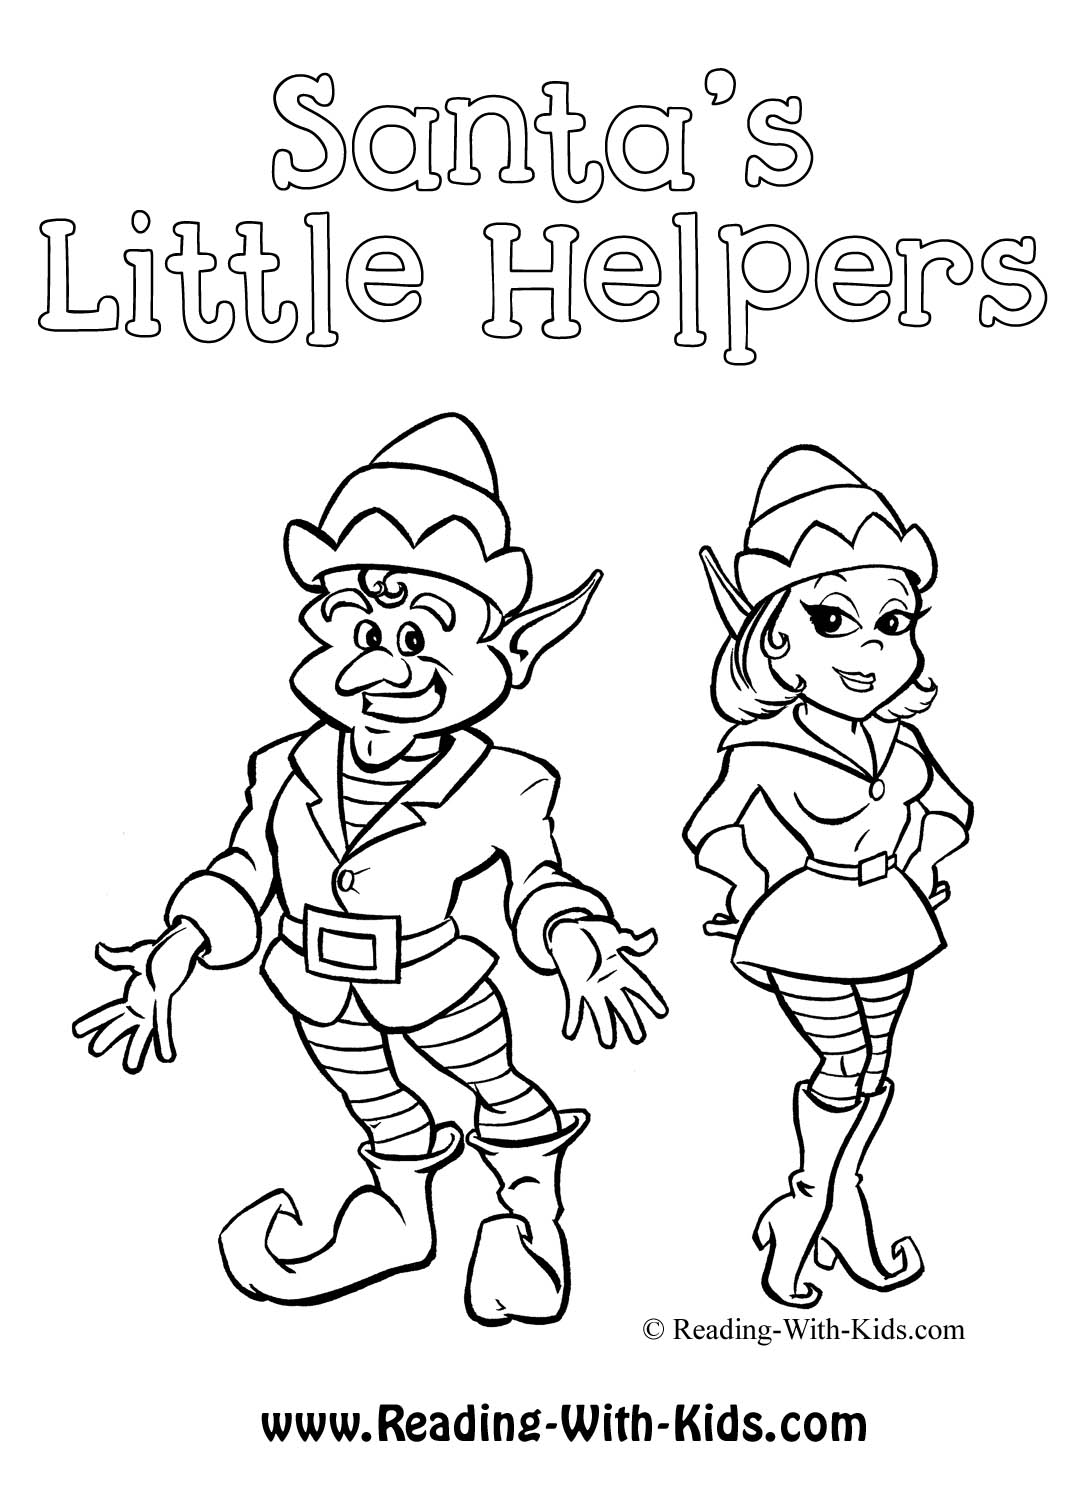 Christmas coloring page · Christmas elves coloring page